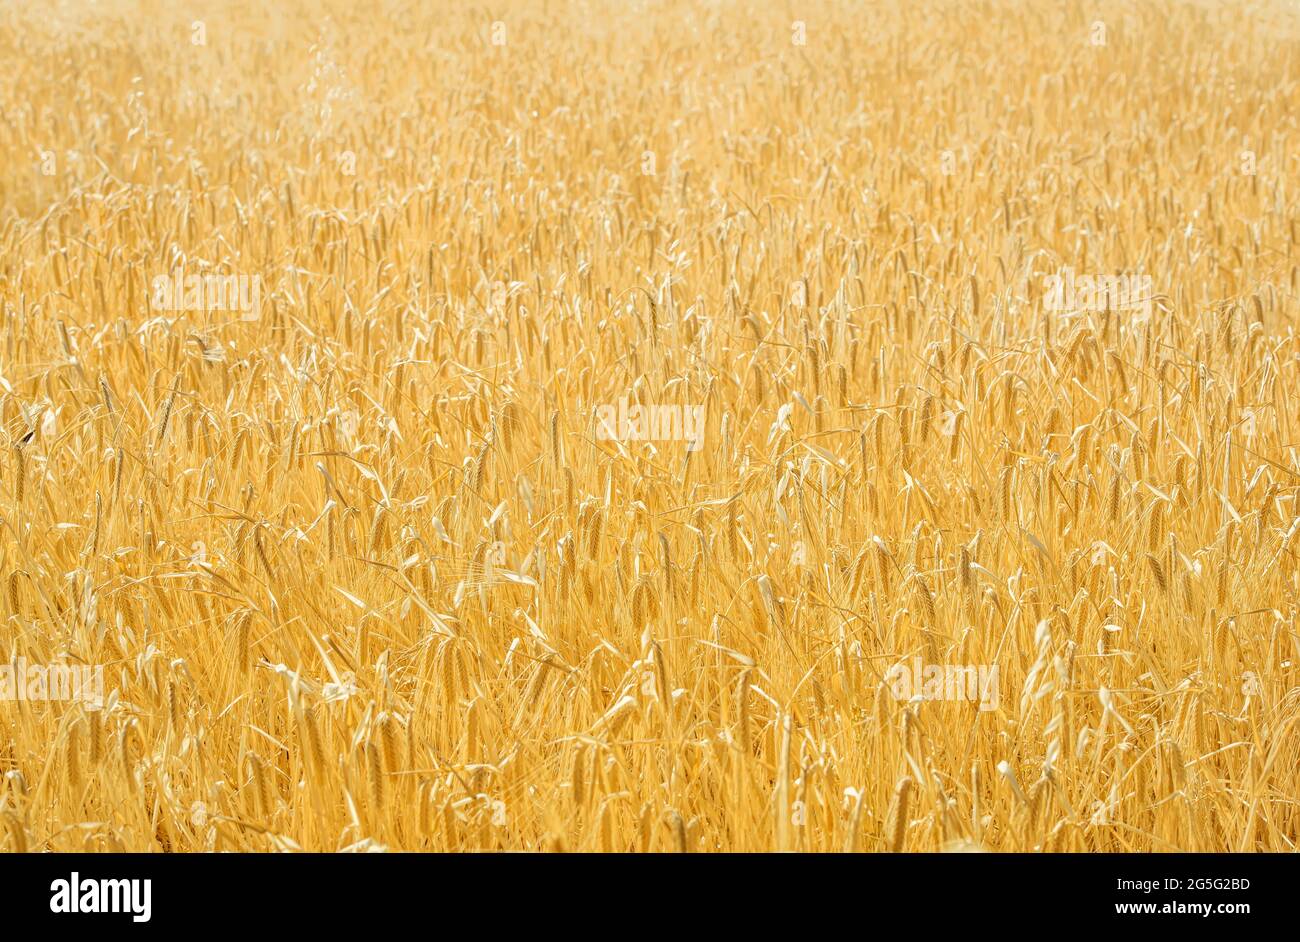 Golden field of mixed crops (livestock fodder), natural background Stock Photo